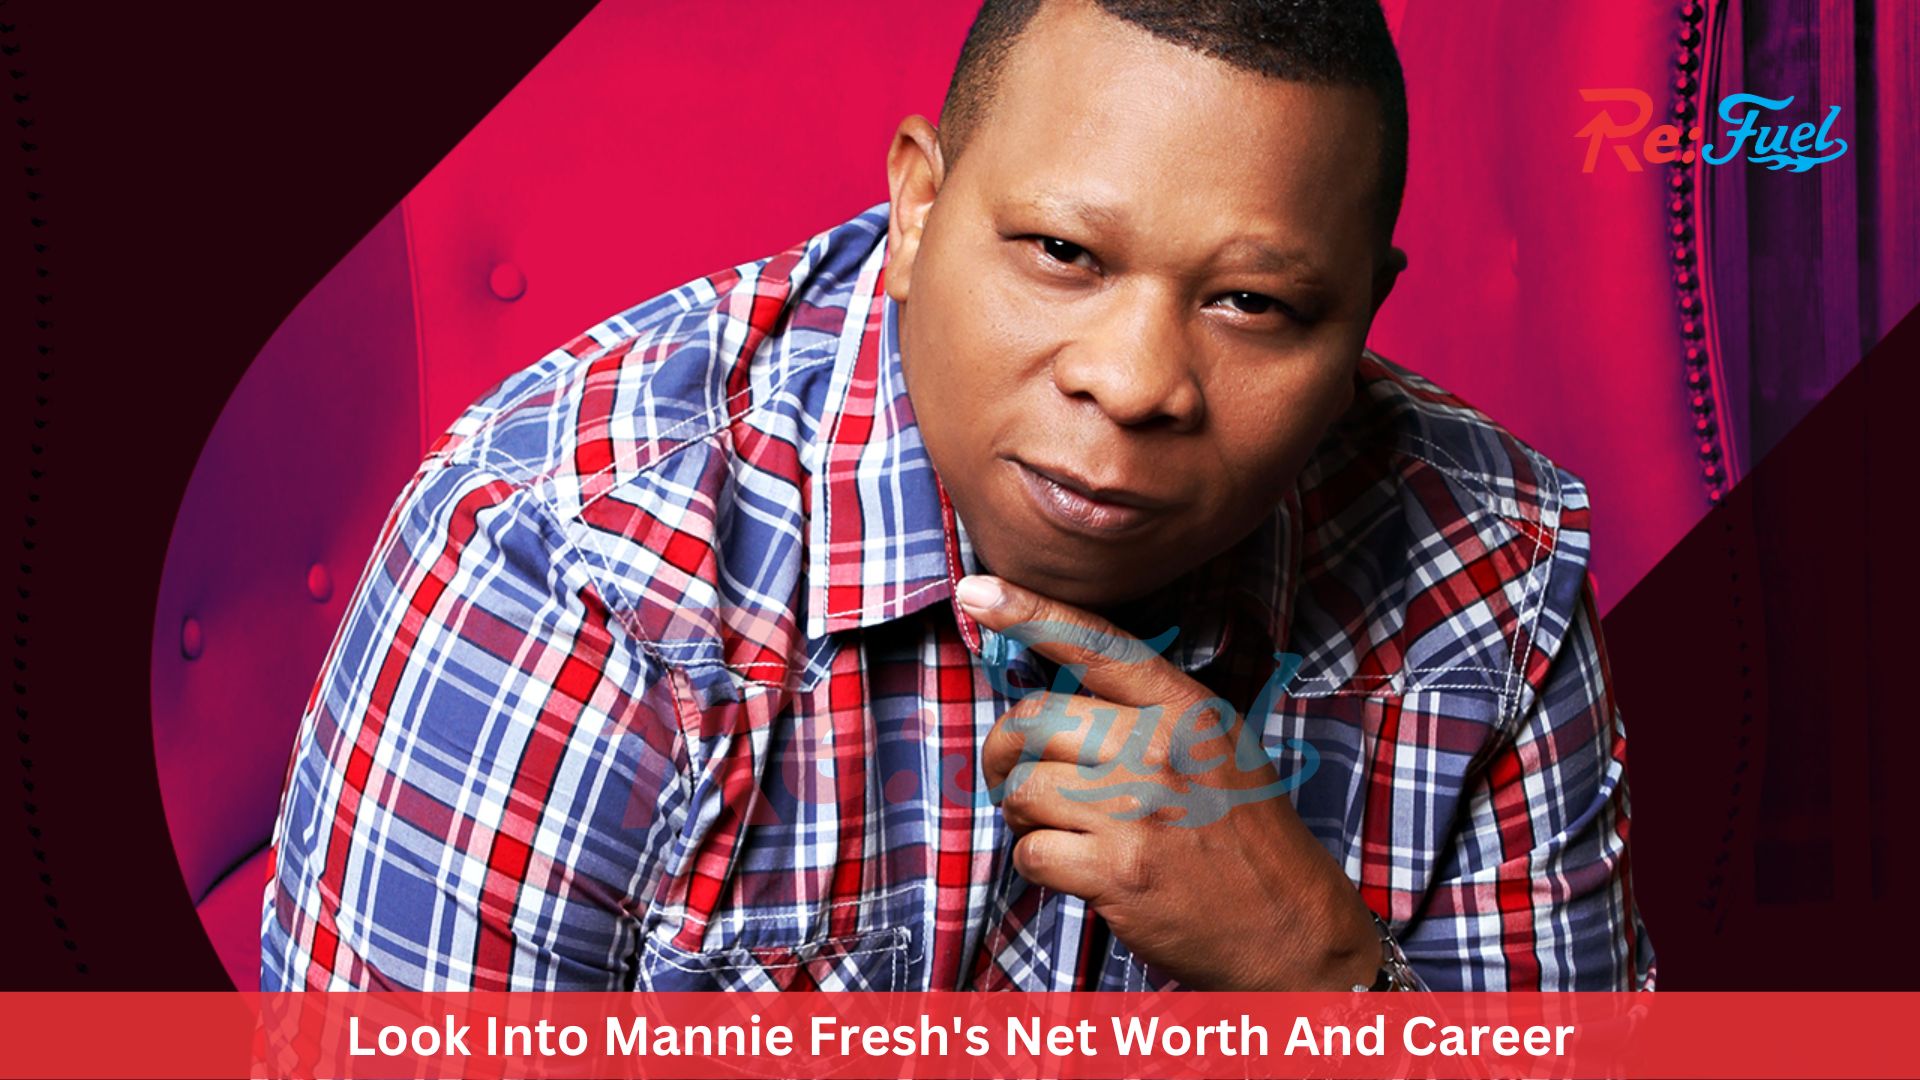 Look Into Mannie Fresh's Net Worth And Career